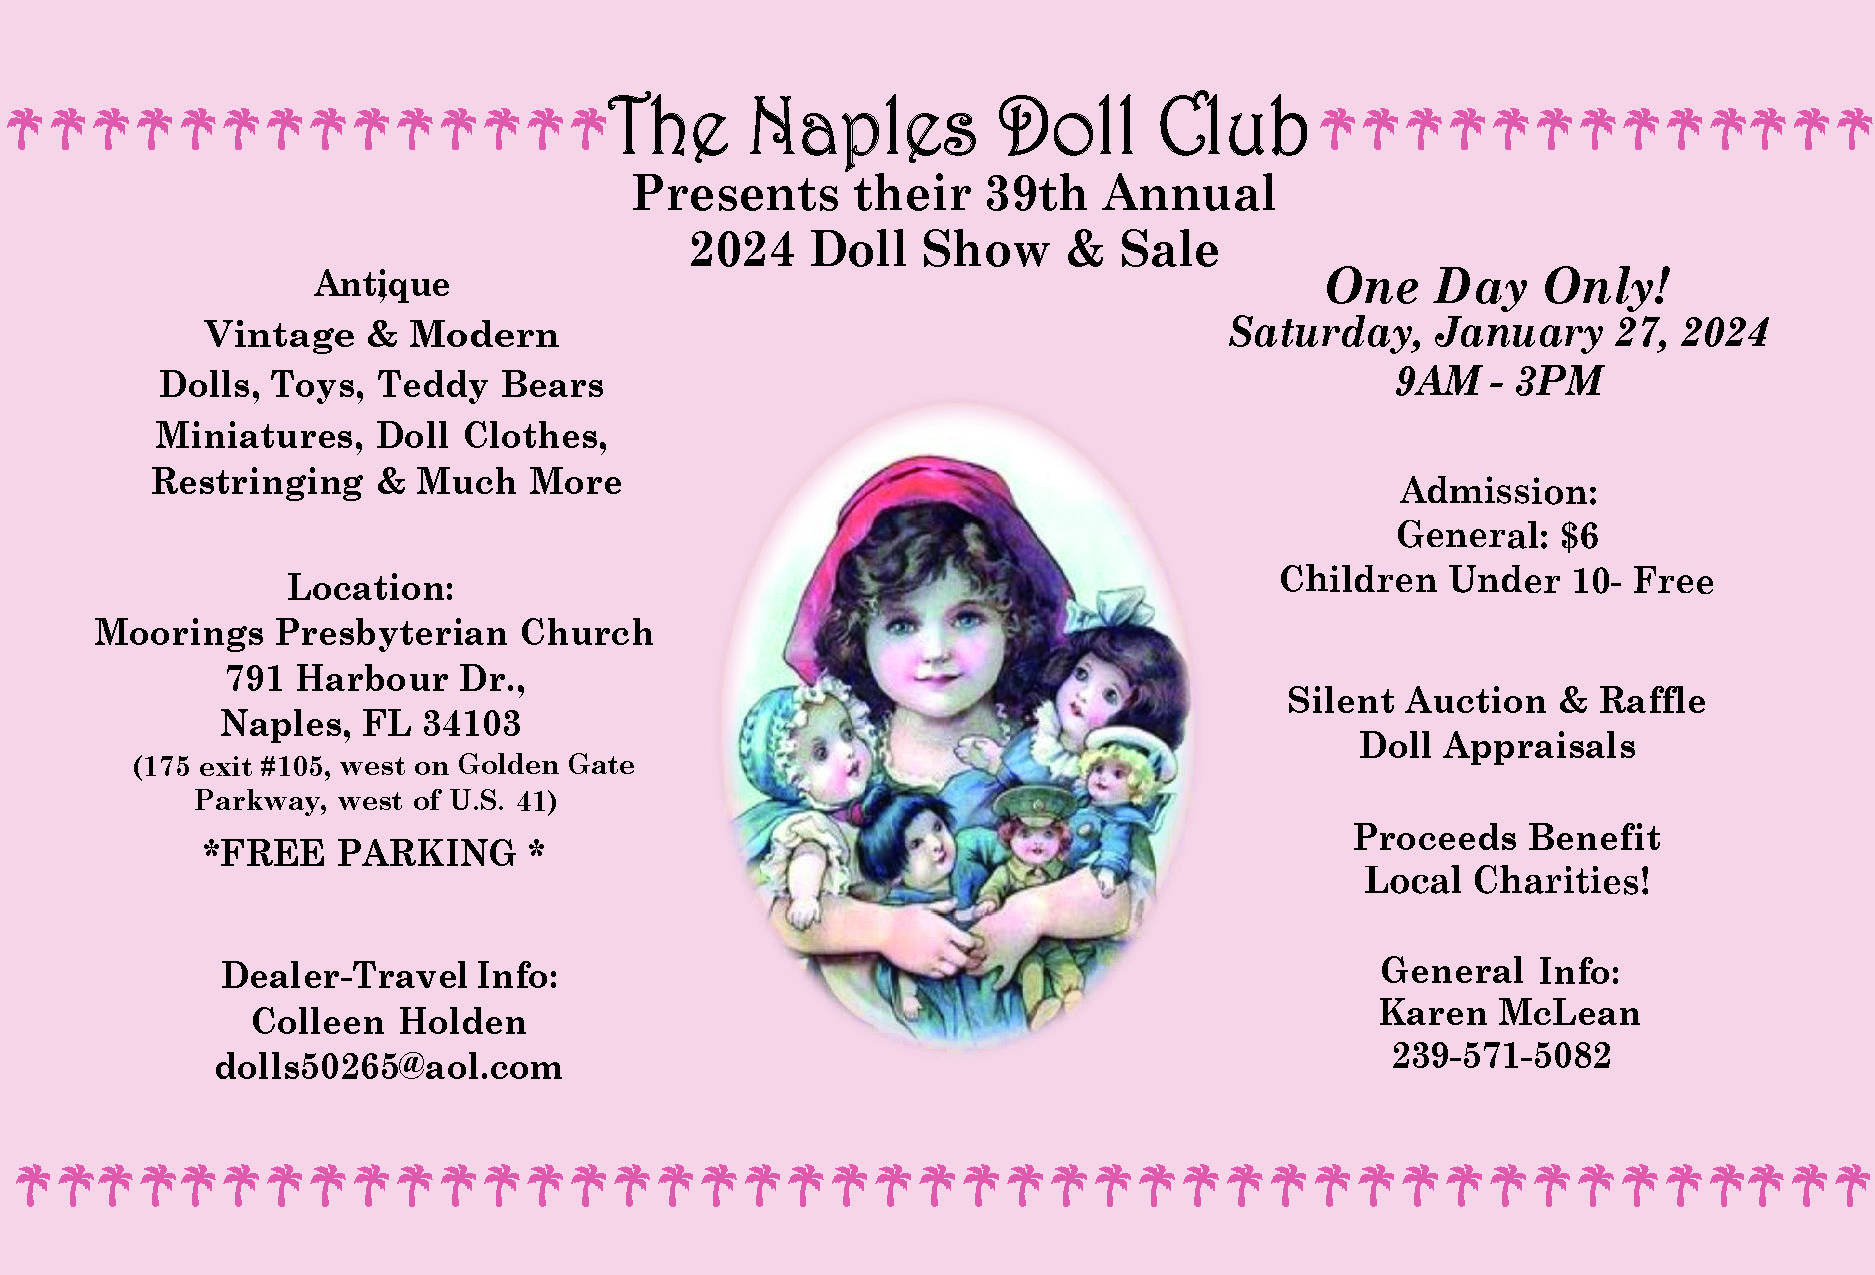 The Naples Doll Club Show and Sale